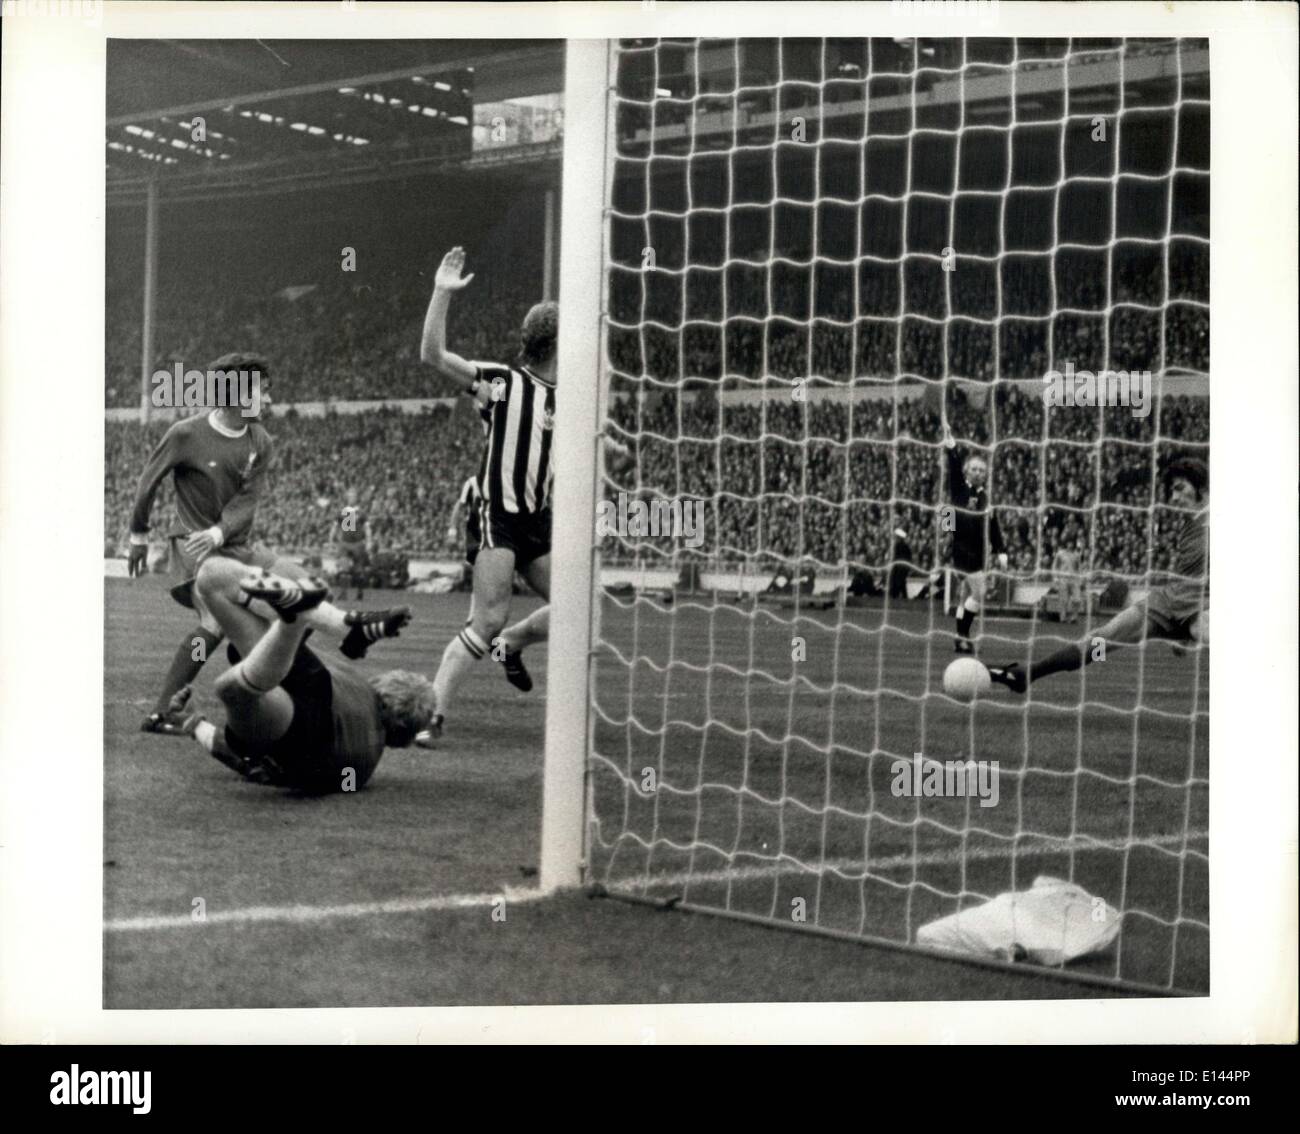 Apr. 04, 2012 - Liverpool's Third Goal: Kevin Keegan (right) about to shoot ball into Newcastle net, with the goalkeeper, Iam McFaul, already on ground after parring an earlier shot. Liverpool defeated Newcastle by three goals to nil and so won the British F.A. Cup Final at Wembley Stadium, London, today, May 4th. Stock Photo